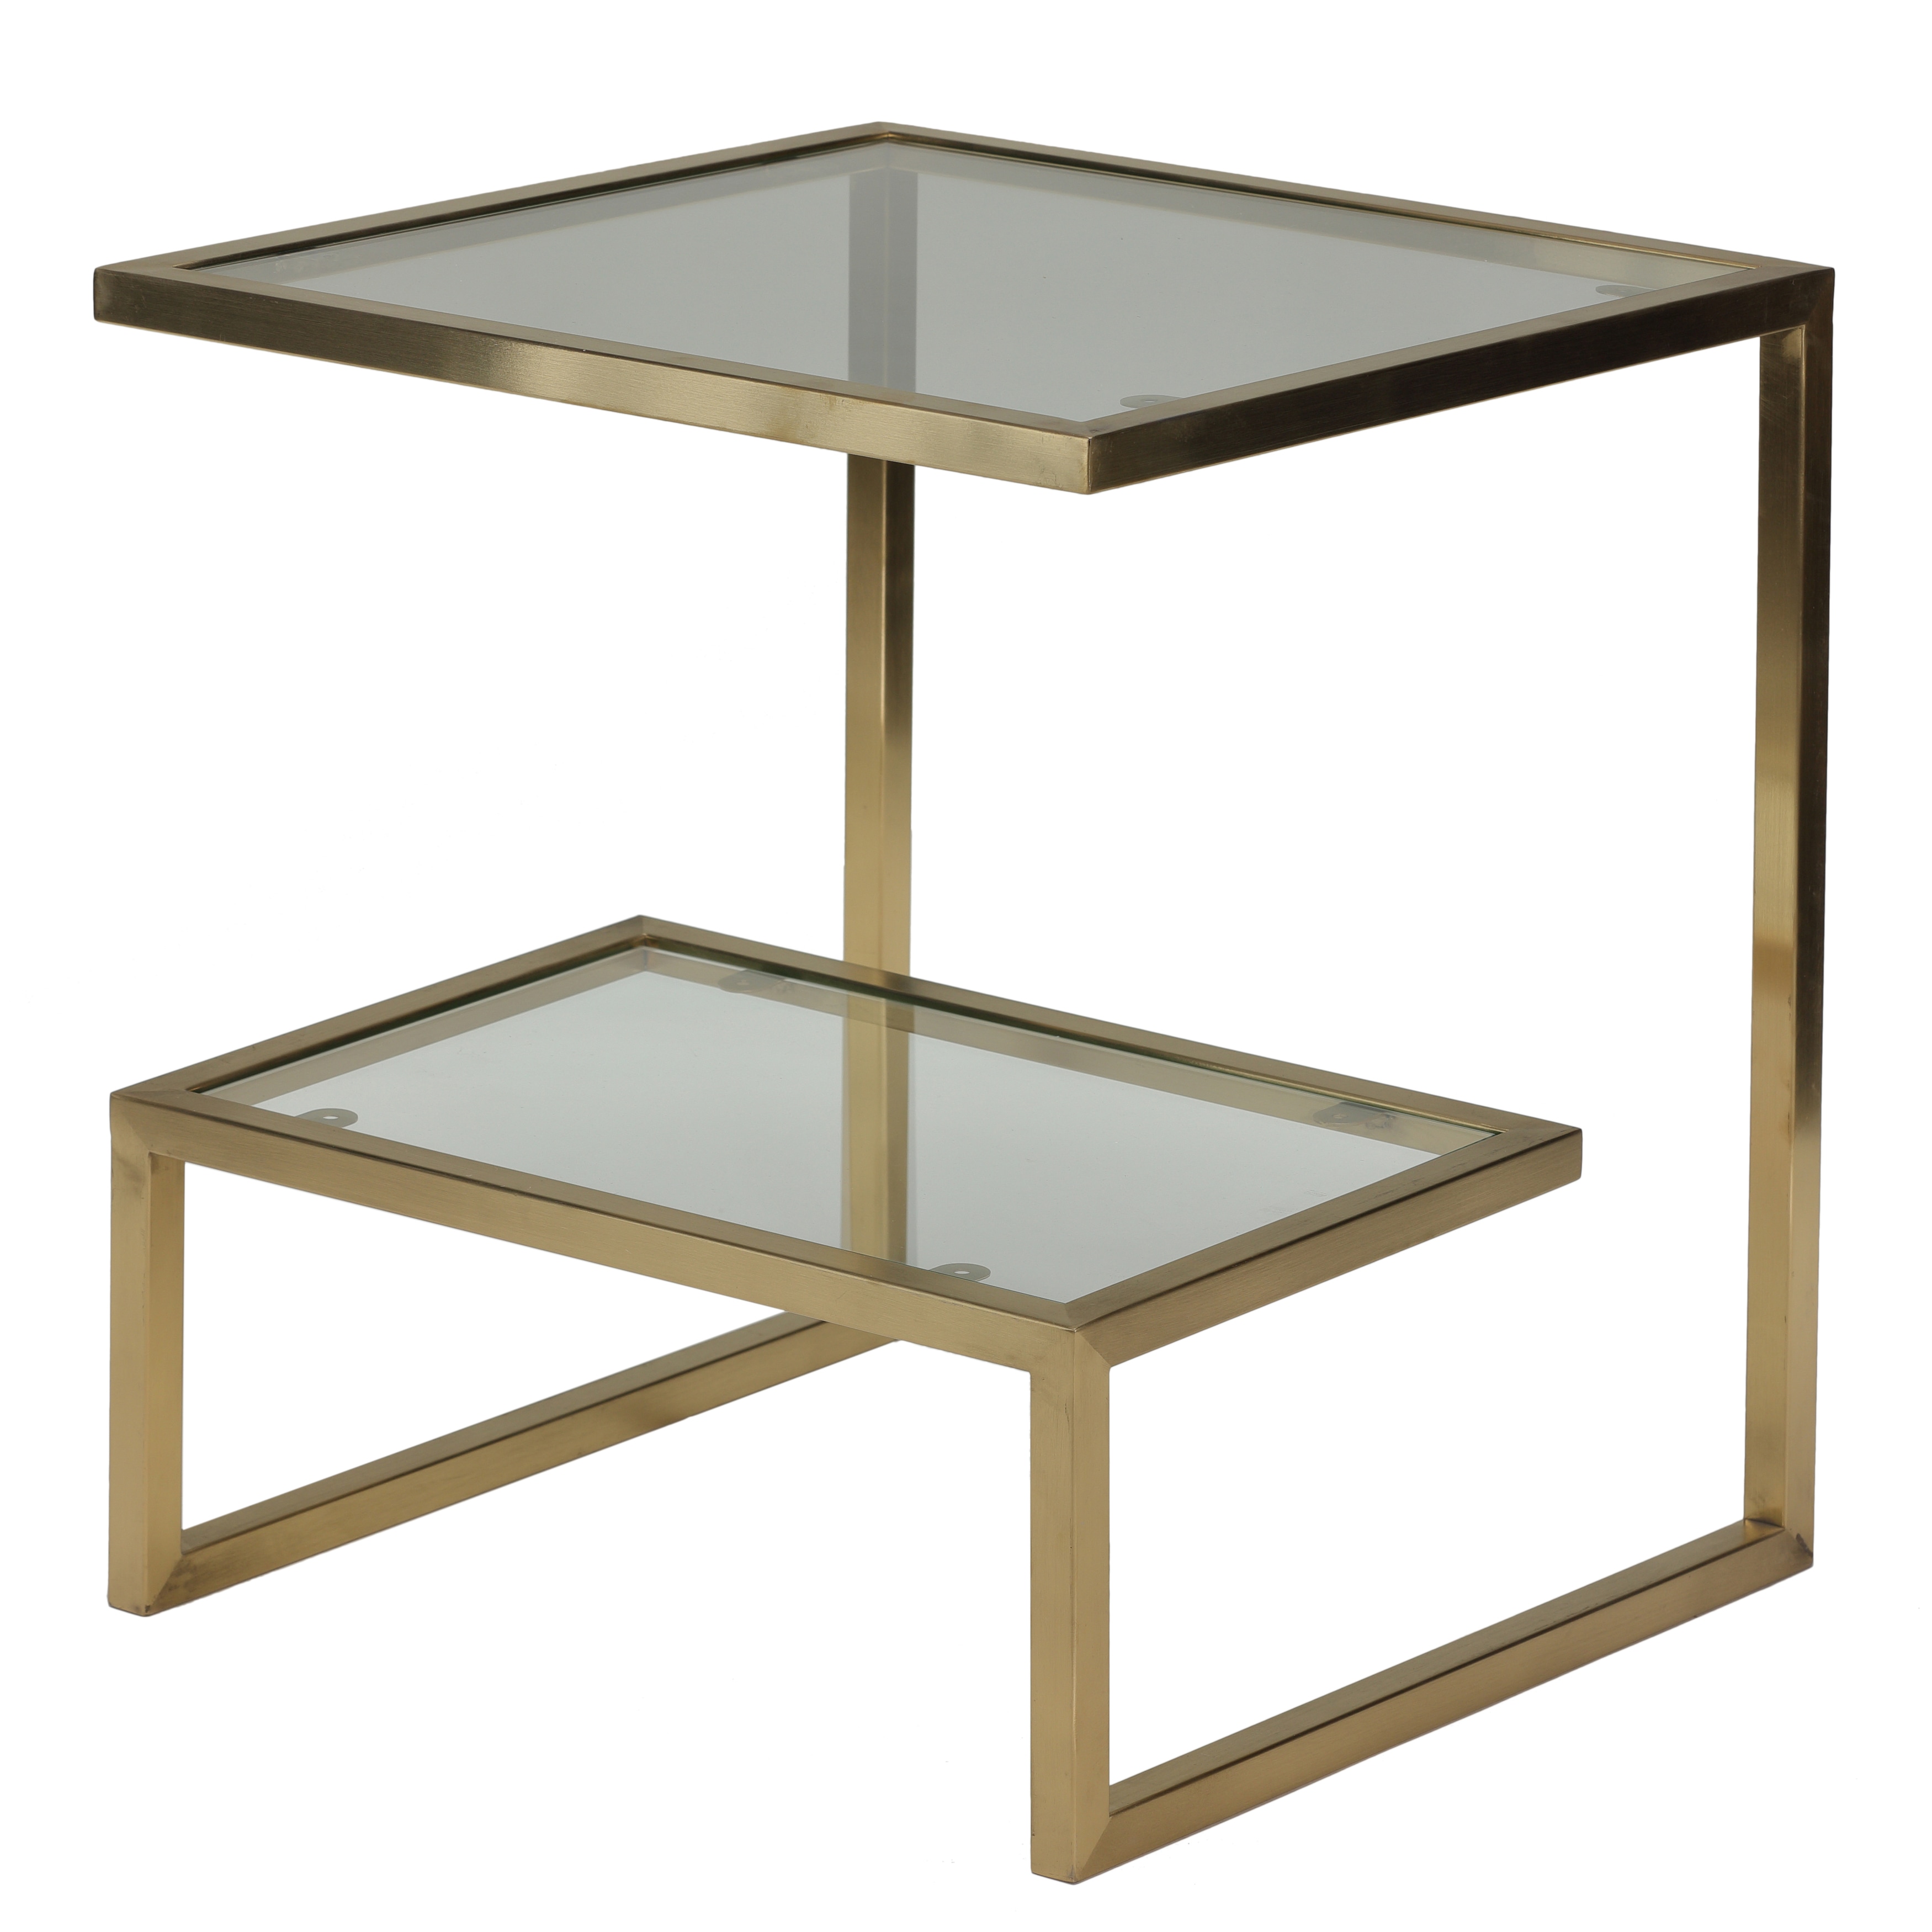 cortesi home luician contemporary end table brushed gold tables free shipping today small bamboo coffee antique solid oak black gloss storage brown patio side ashley furniture